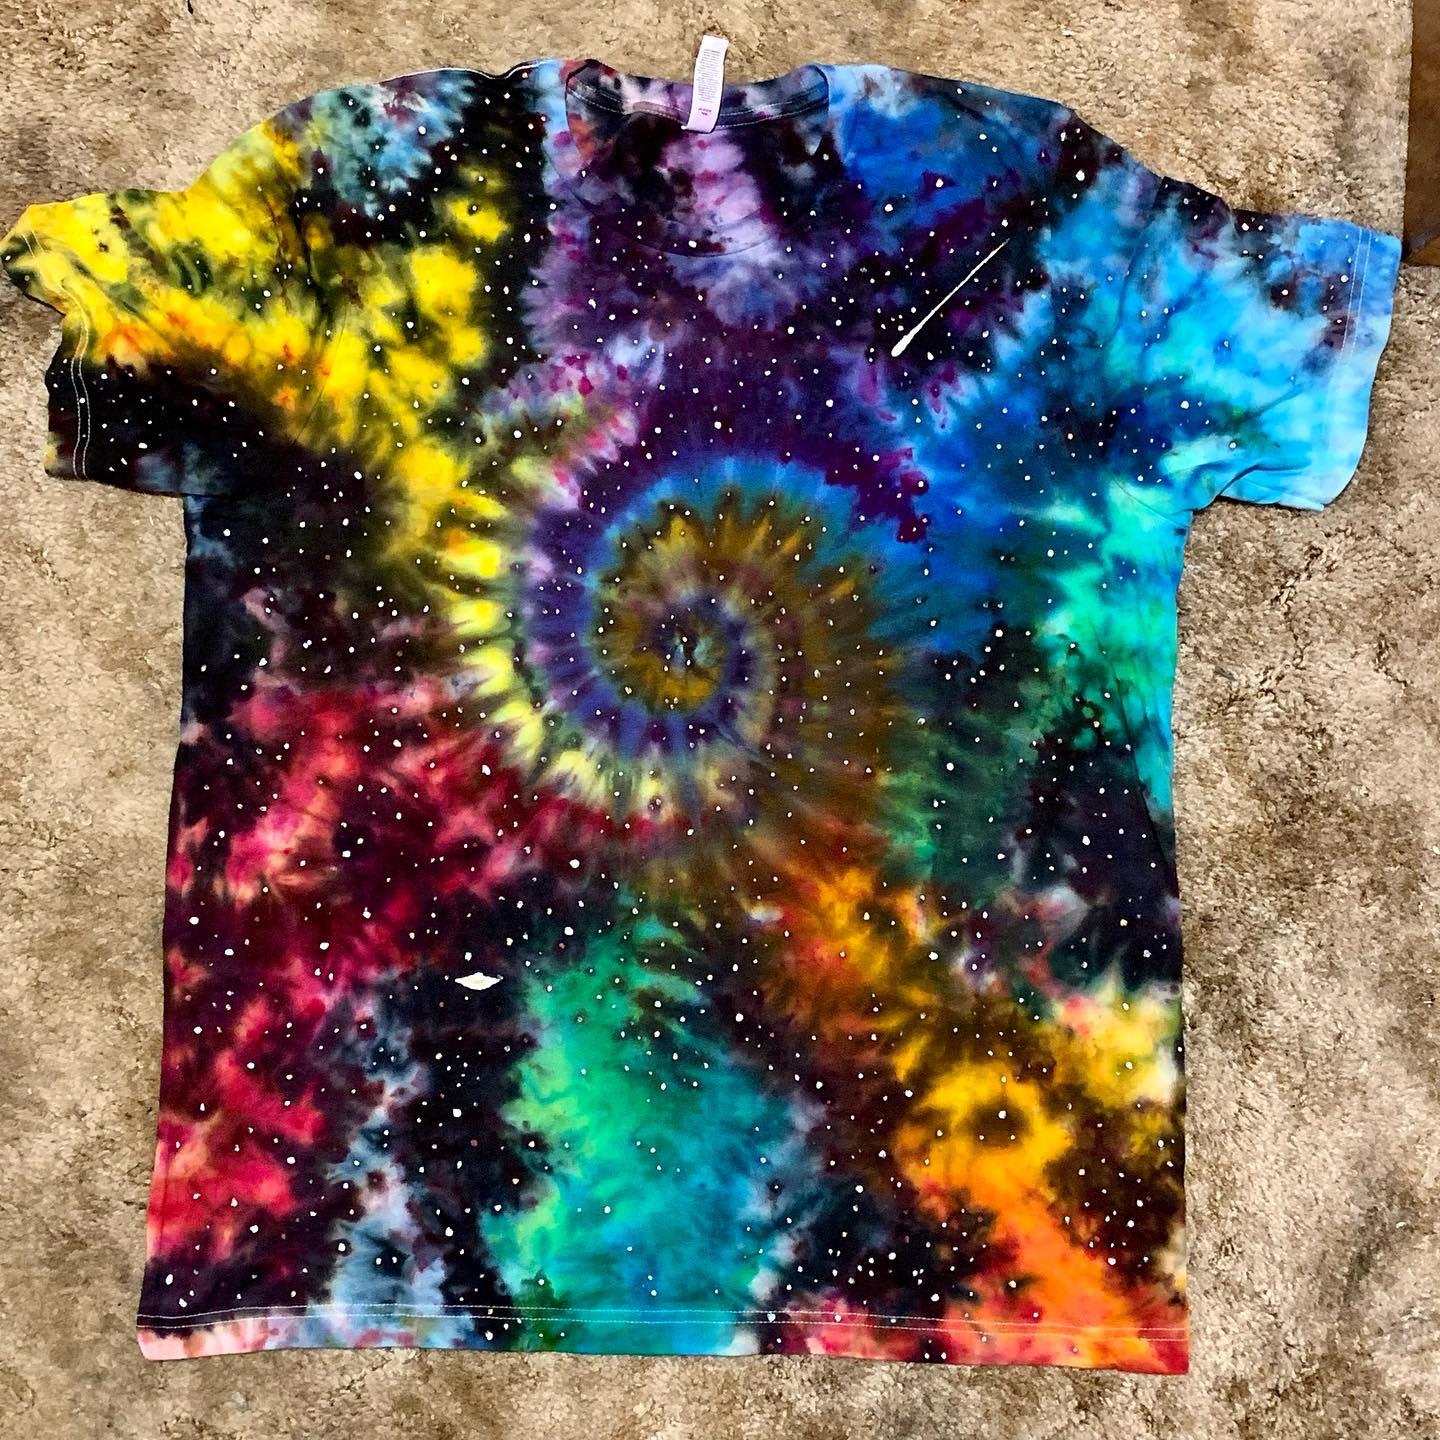 a fellow deadhead recommended i share this here. i was apprehensive since theres nothing dead about this besides it being tie dye, but hope i bring some warm n fuzzies to your day with this. and i miss jerry too!